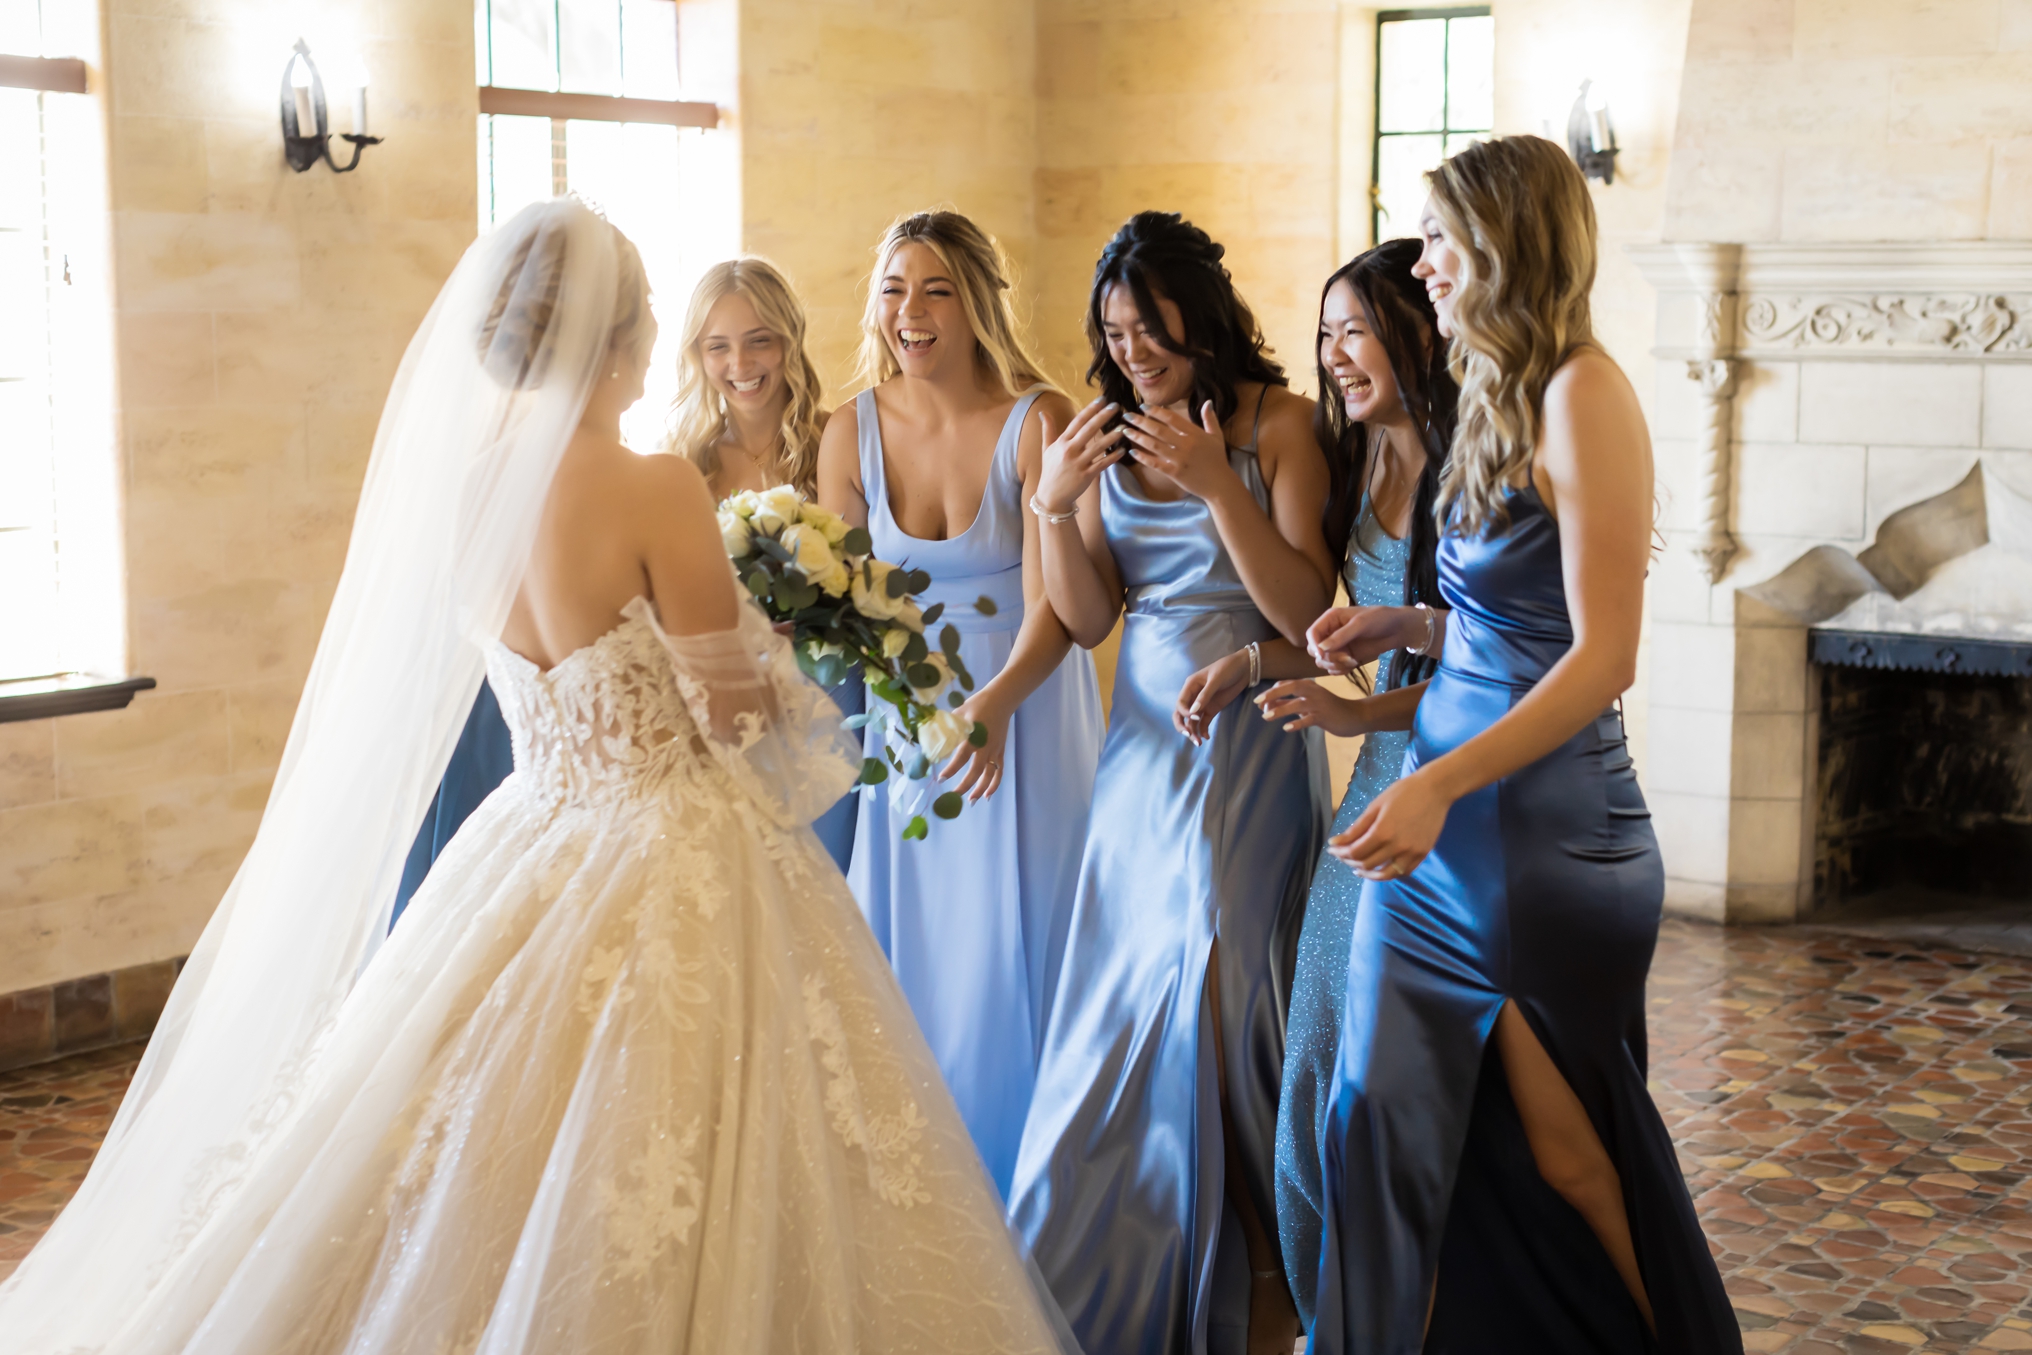 Bride doing a first look with her bridesmaids at the Powel Crosley Estate